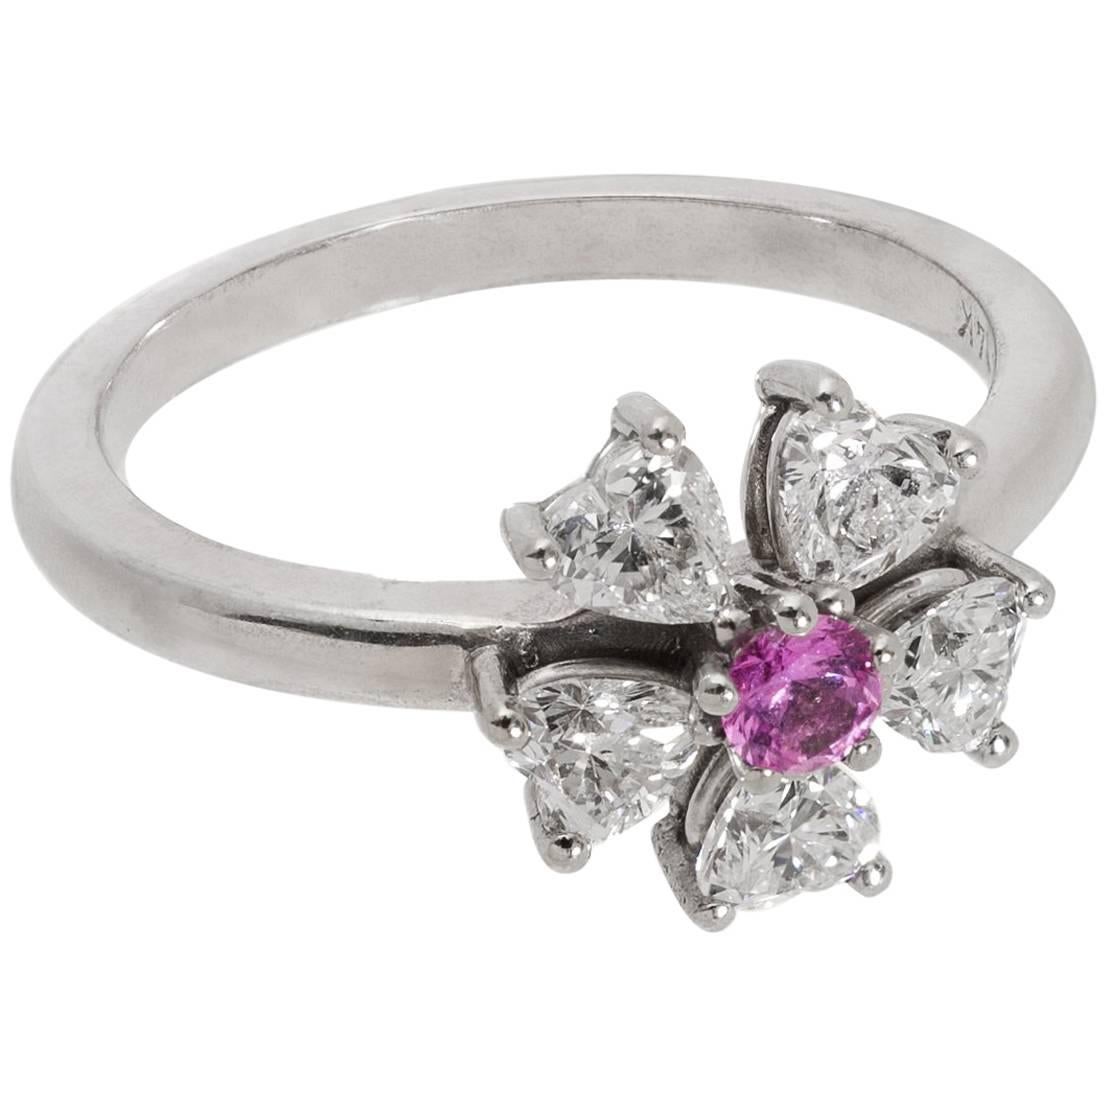 Floral Motif Diamond Ring with Ideal Cut Heart Shaped Diamonds